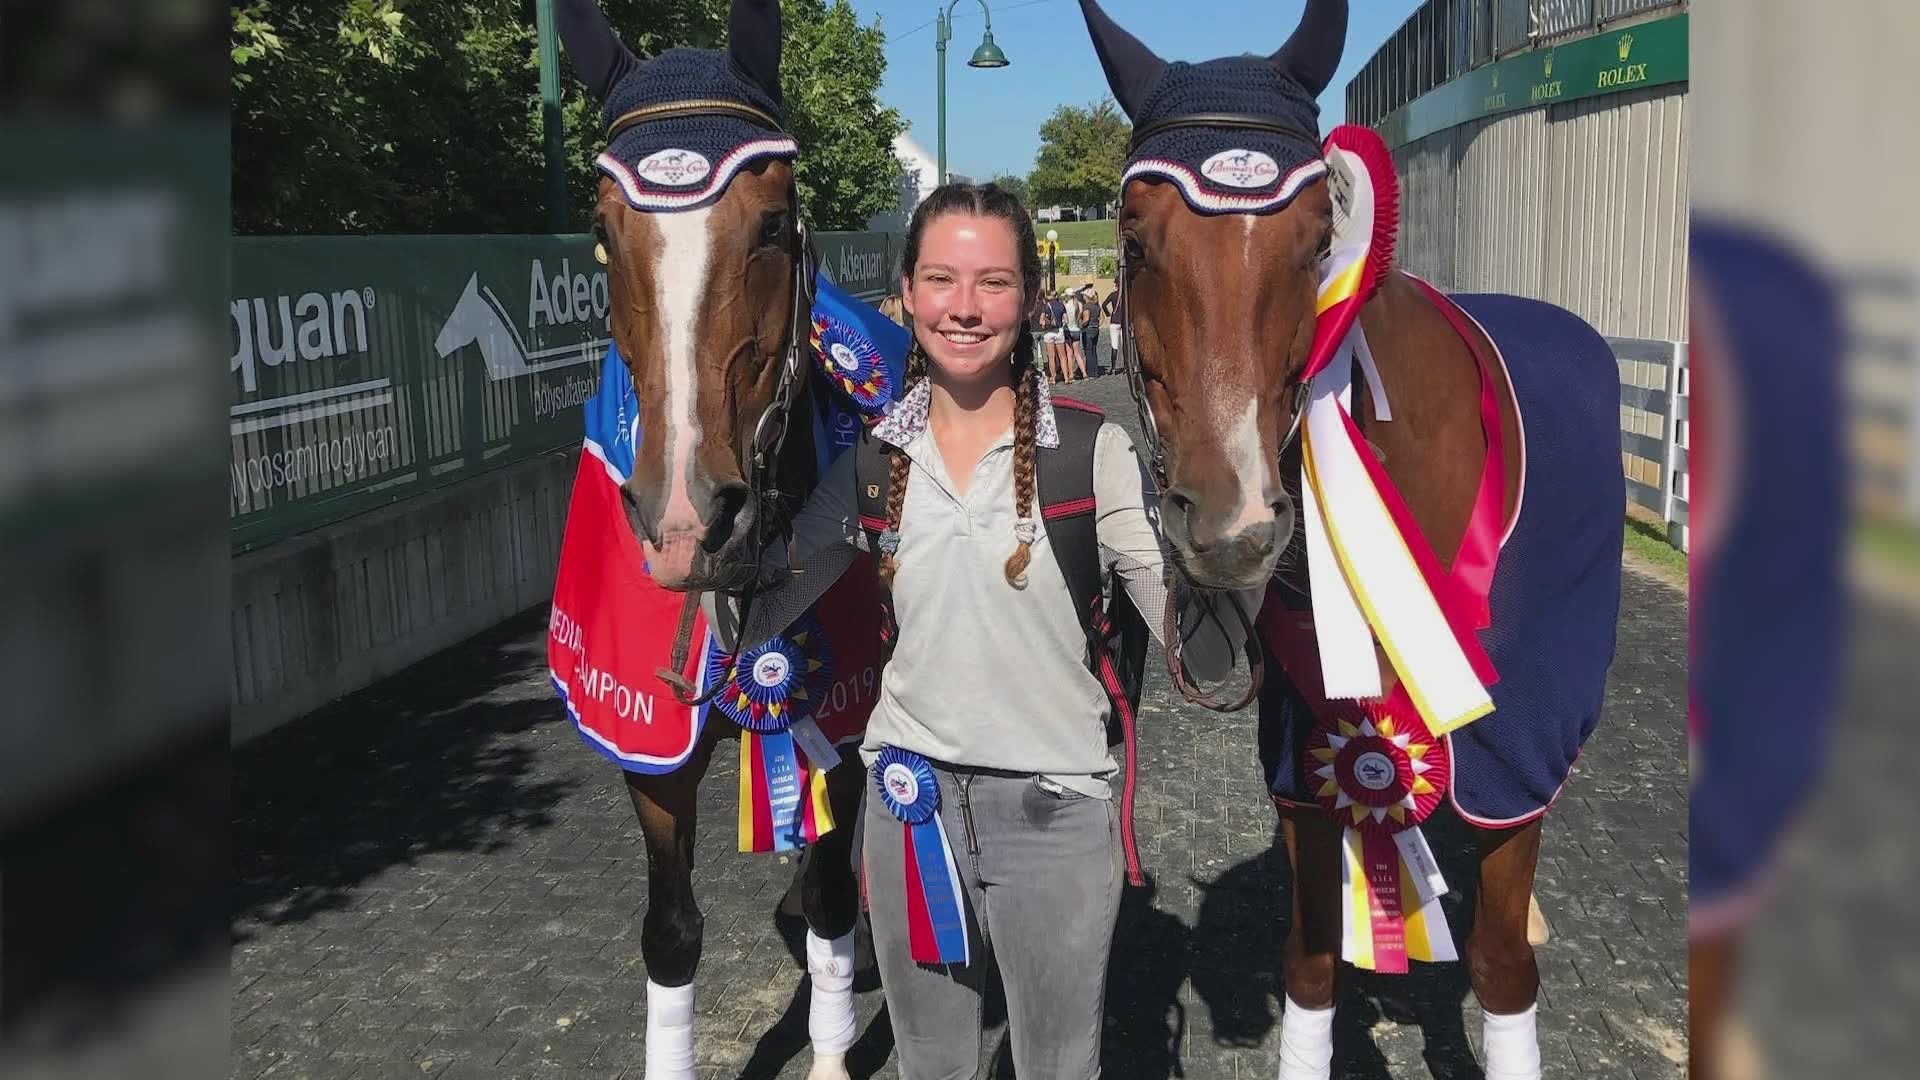 A Seattle-area woman is leaving her day job to go to the Olympics to help take care of the largest competitors there -- the horses.